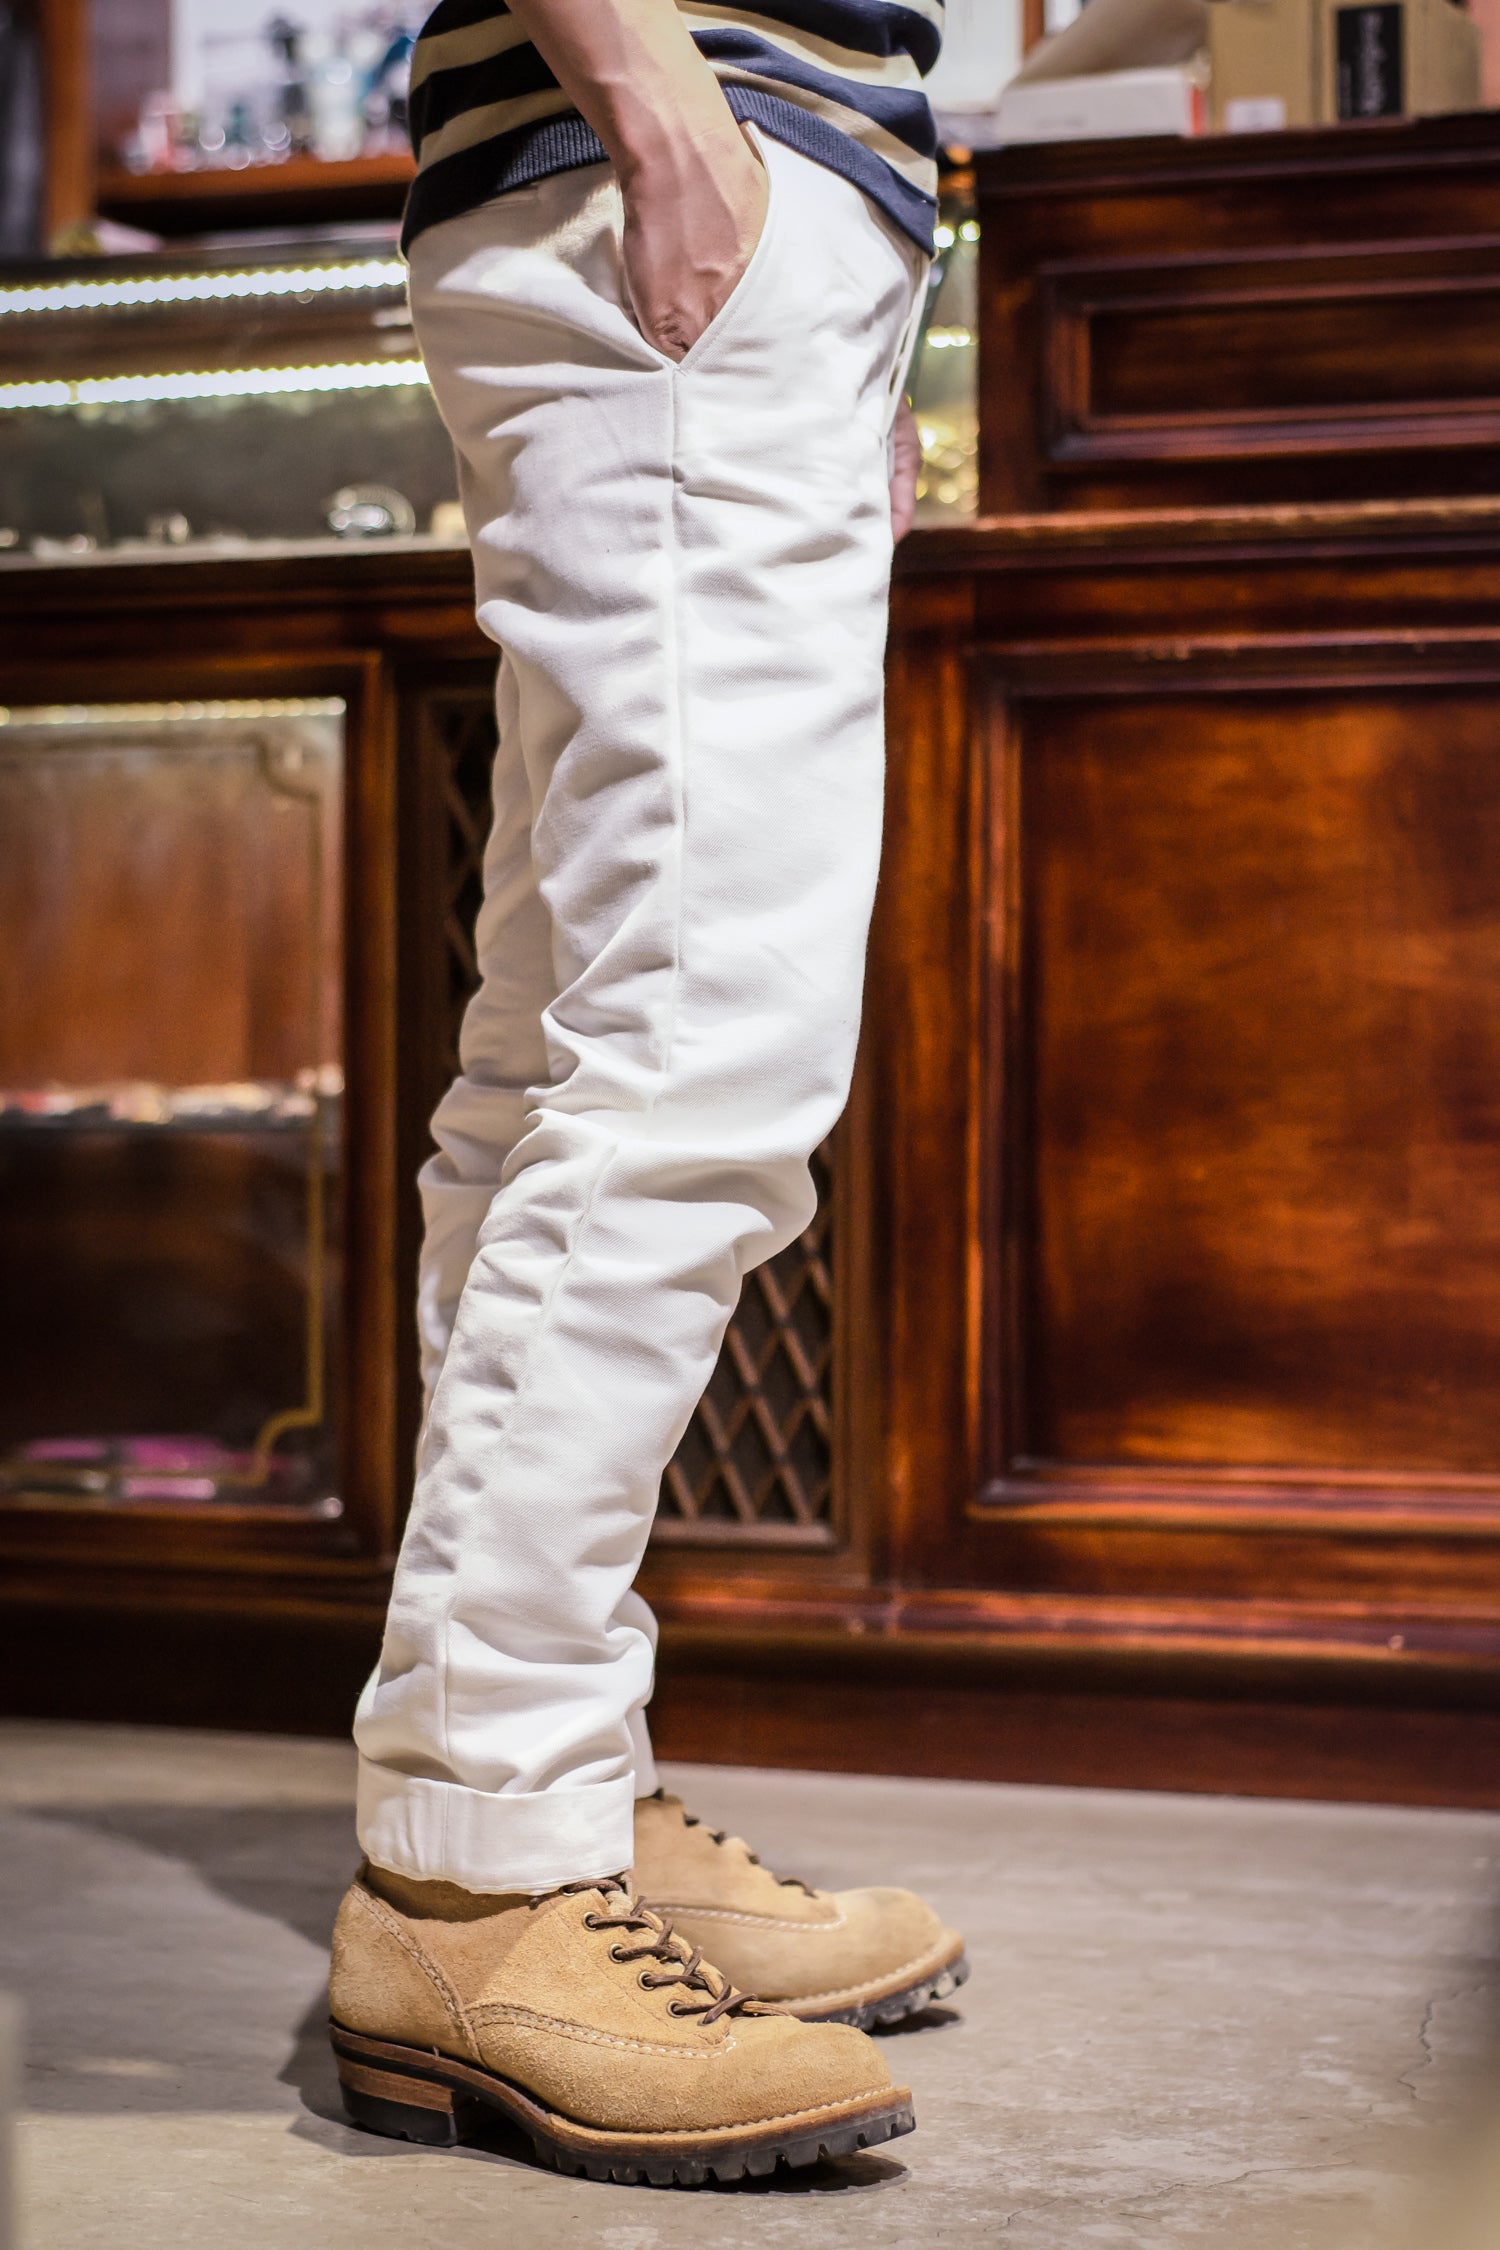 ACV-TR01CL HEAVY LINEN TROUSERS - WHITE - May club